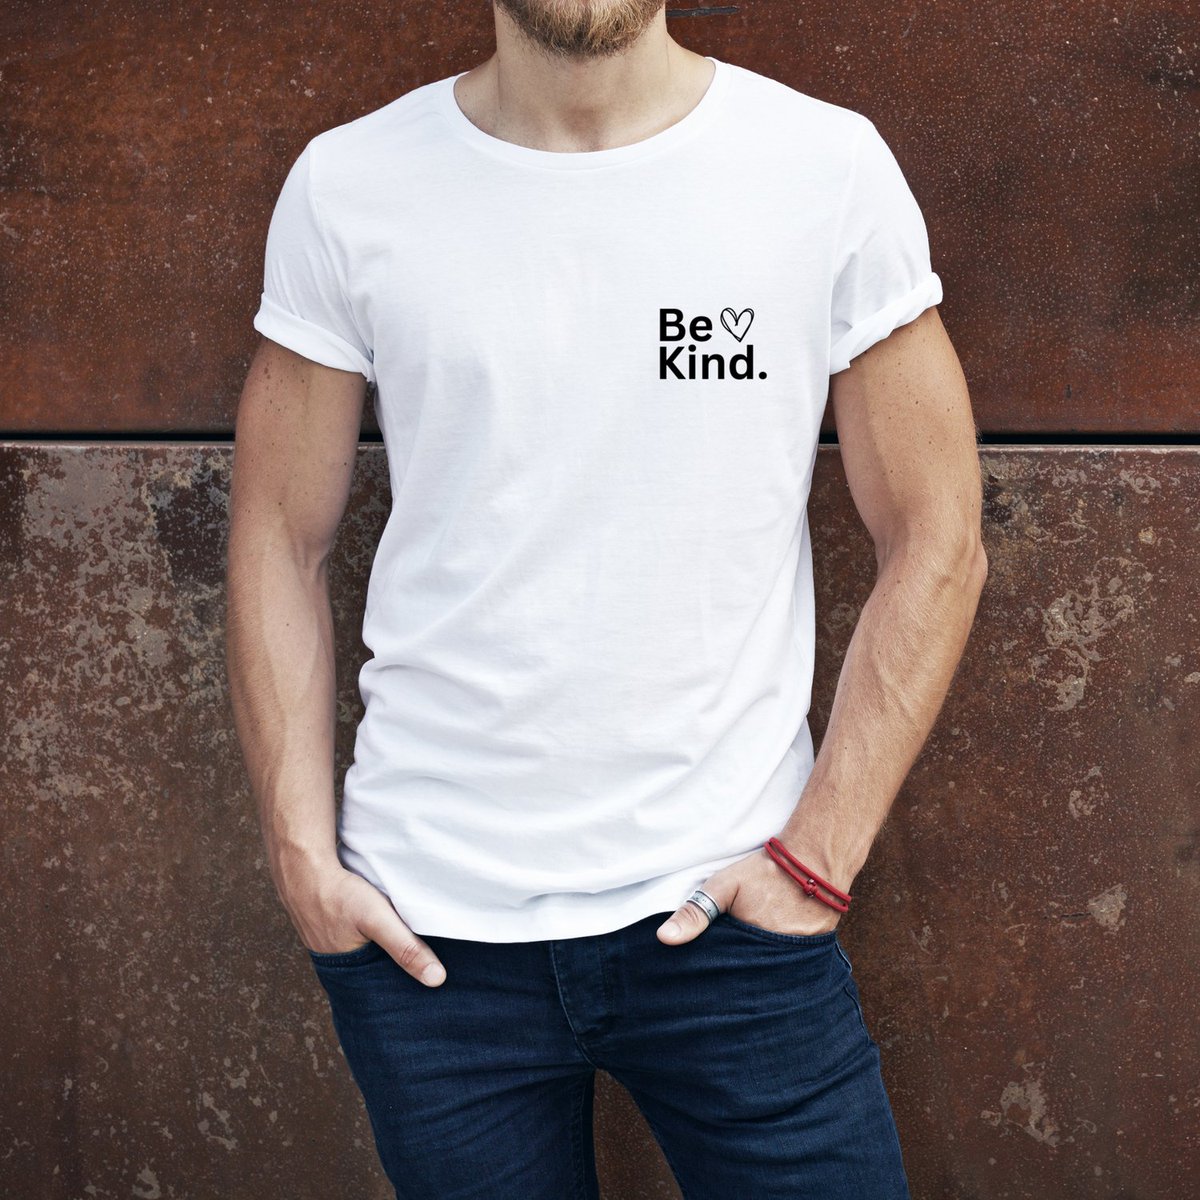 One of the new range of unisex T-shirts in a soft, organic cotton. It comes in 3 different colour in a slim fit style.
#tshirts #bekindquote #whitetshirts #slogantshirt #smallbusiness #organicclothing #ecotshirt